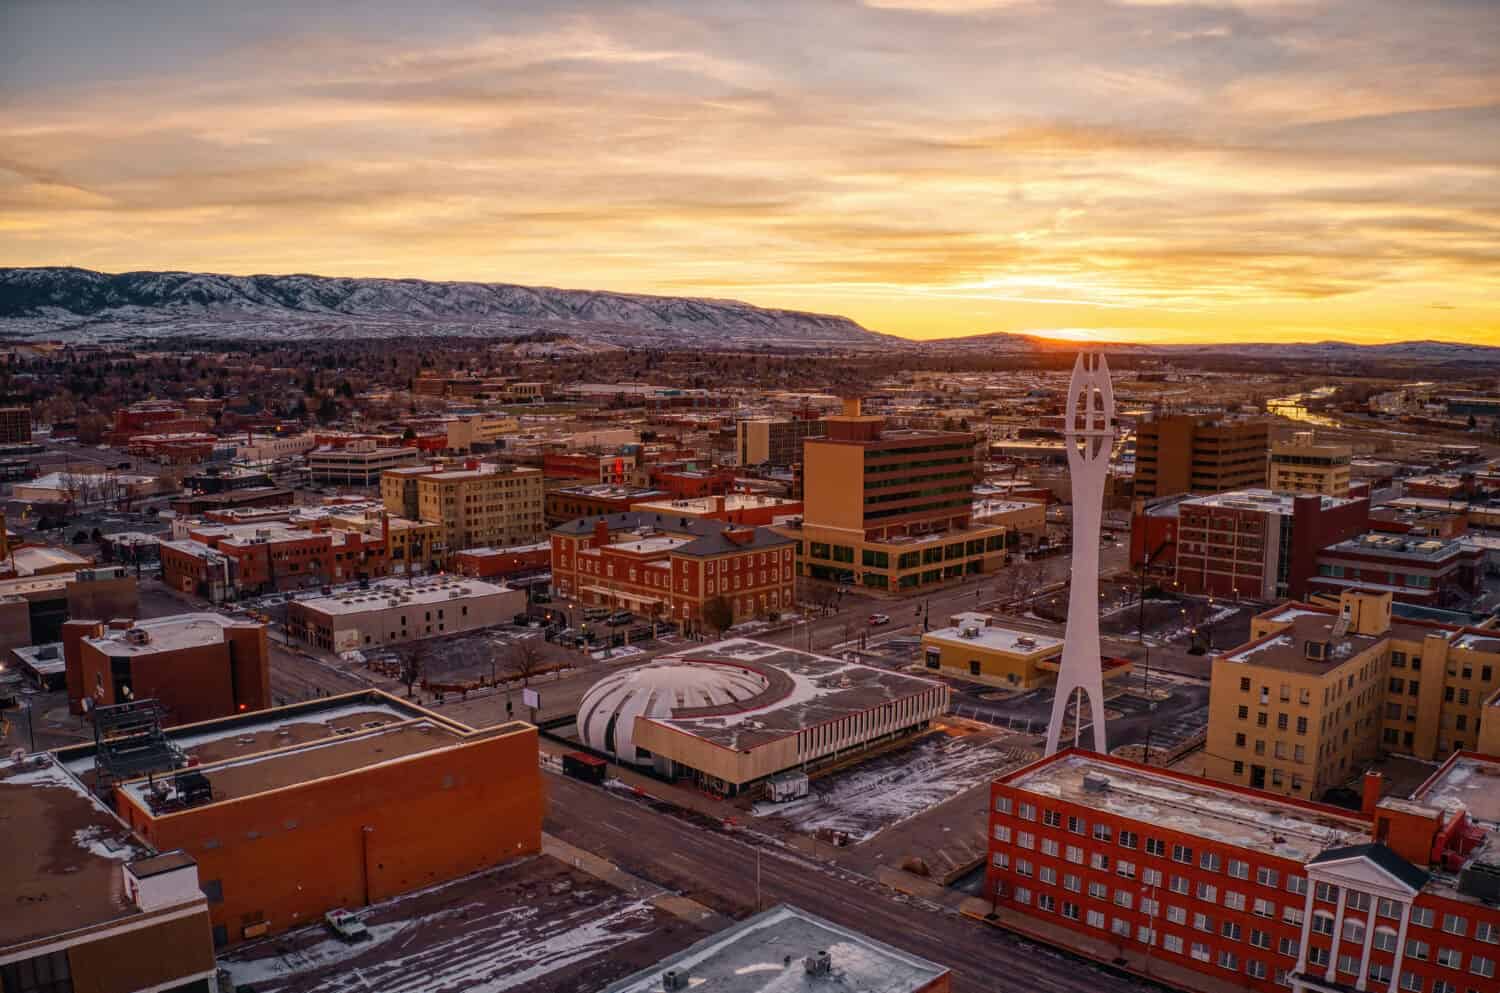 Aerial View of Downtown Casper, Wyoming at Dusk on Christmas Day